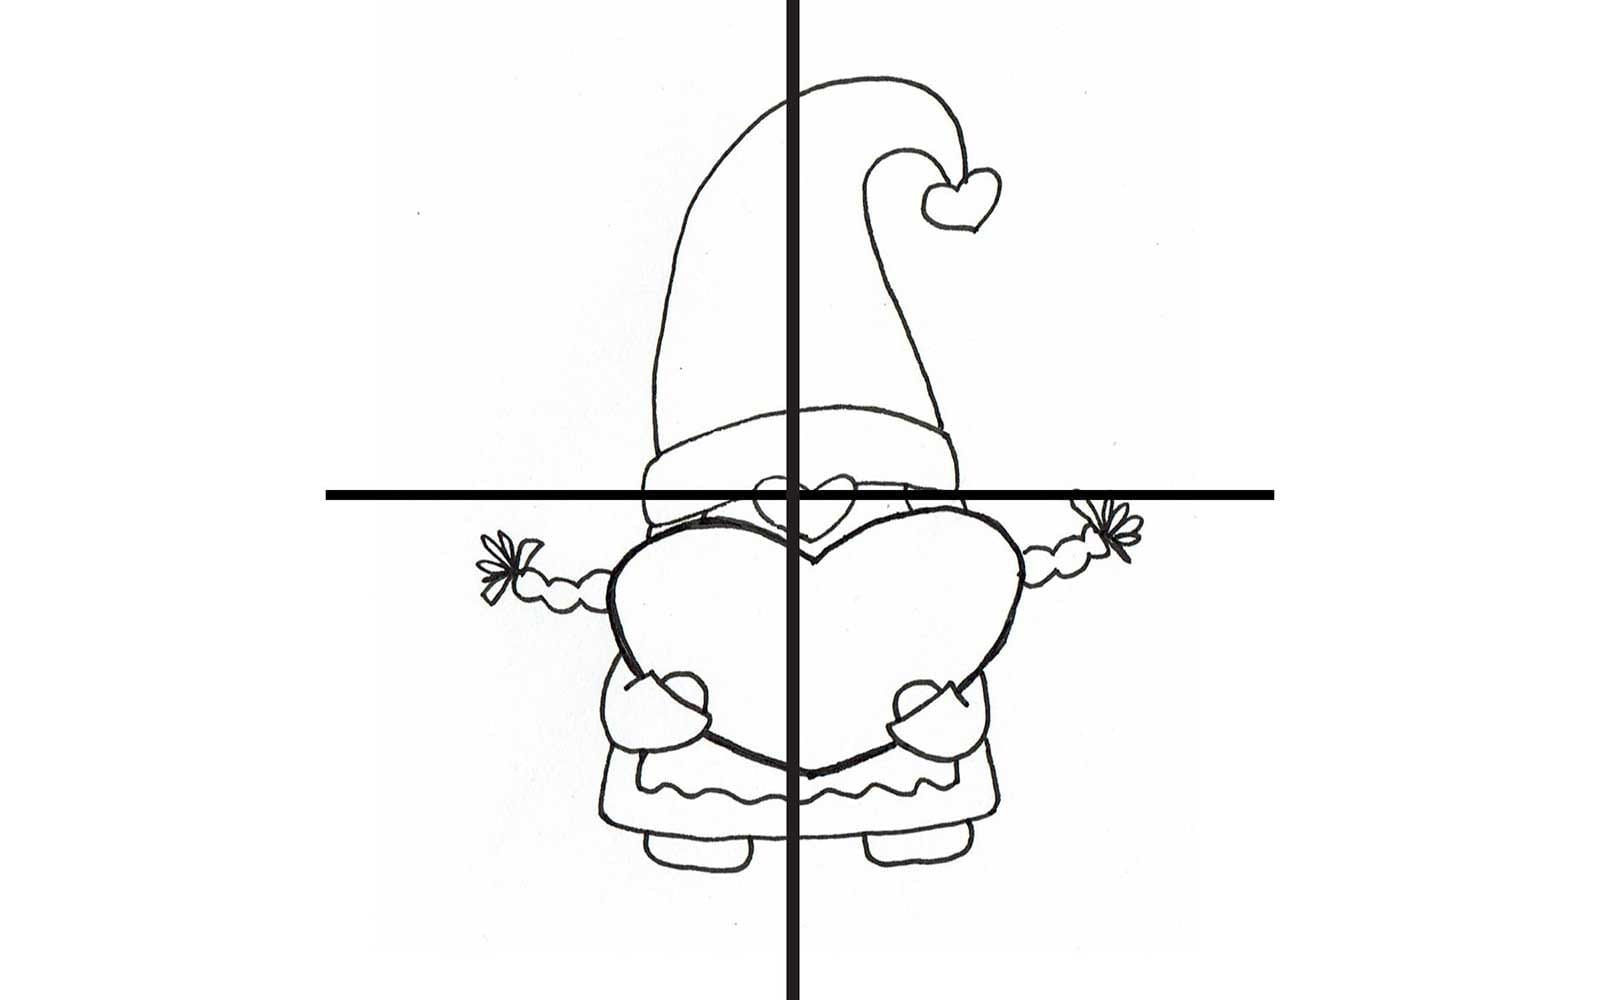 Honey gnome diagram with placement cross mark